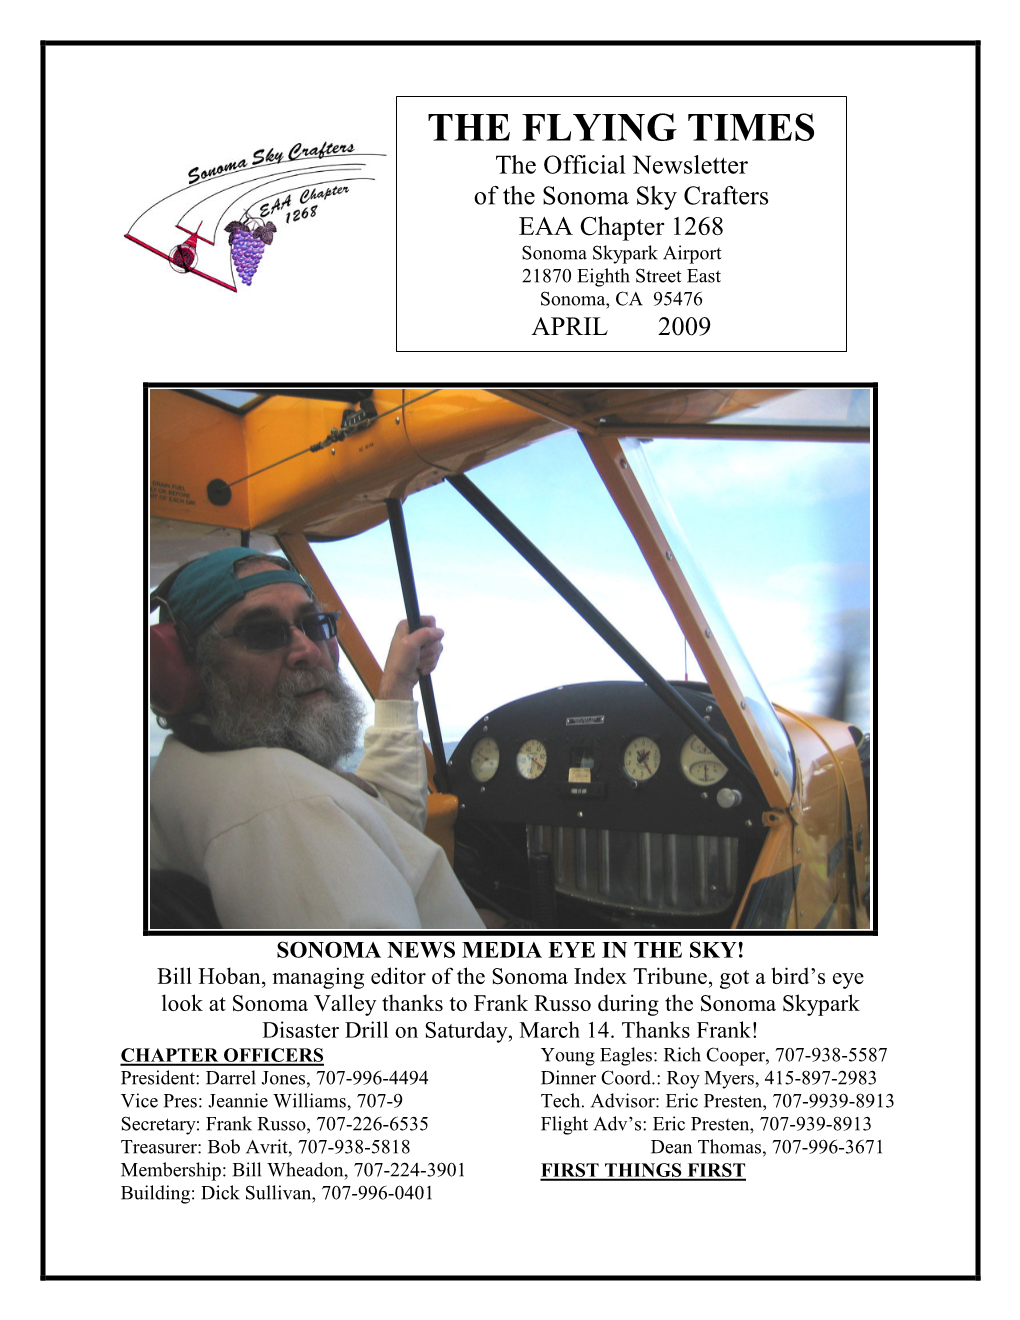 THE FLYING TIMES the Official Newsletter of the Sonoma Sky Crafters EAA Chapter 1268 Sonoma Skypark Airport 21870 Eighth Street East Sonoma, CA 95476 APRIL 2009